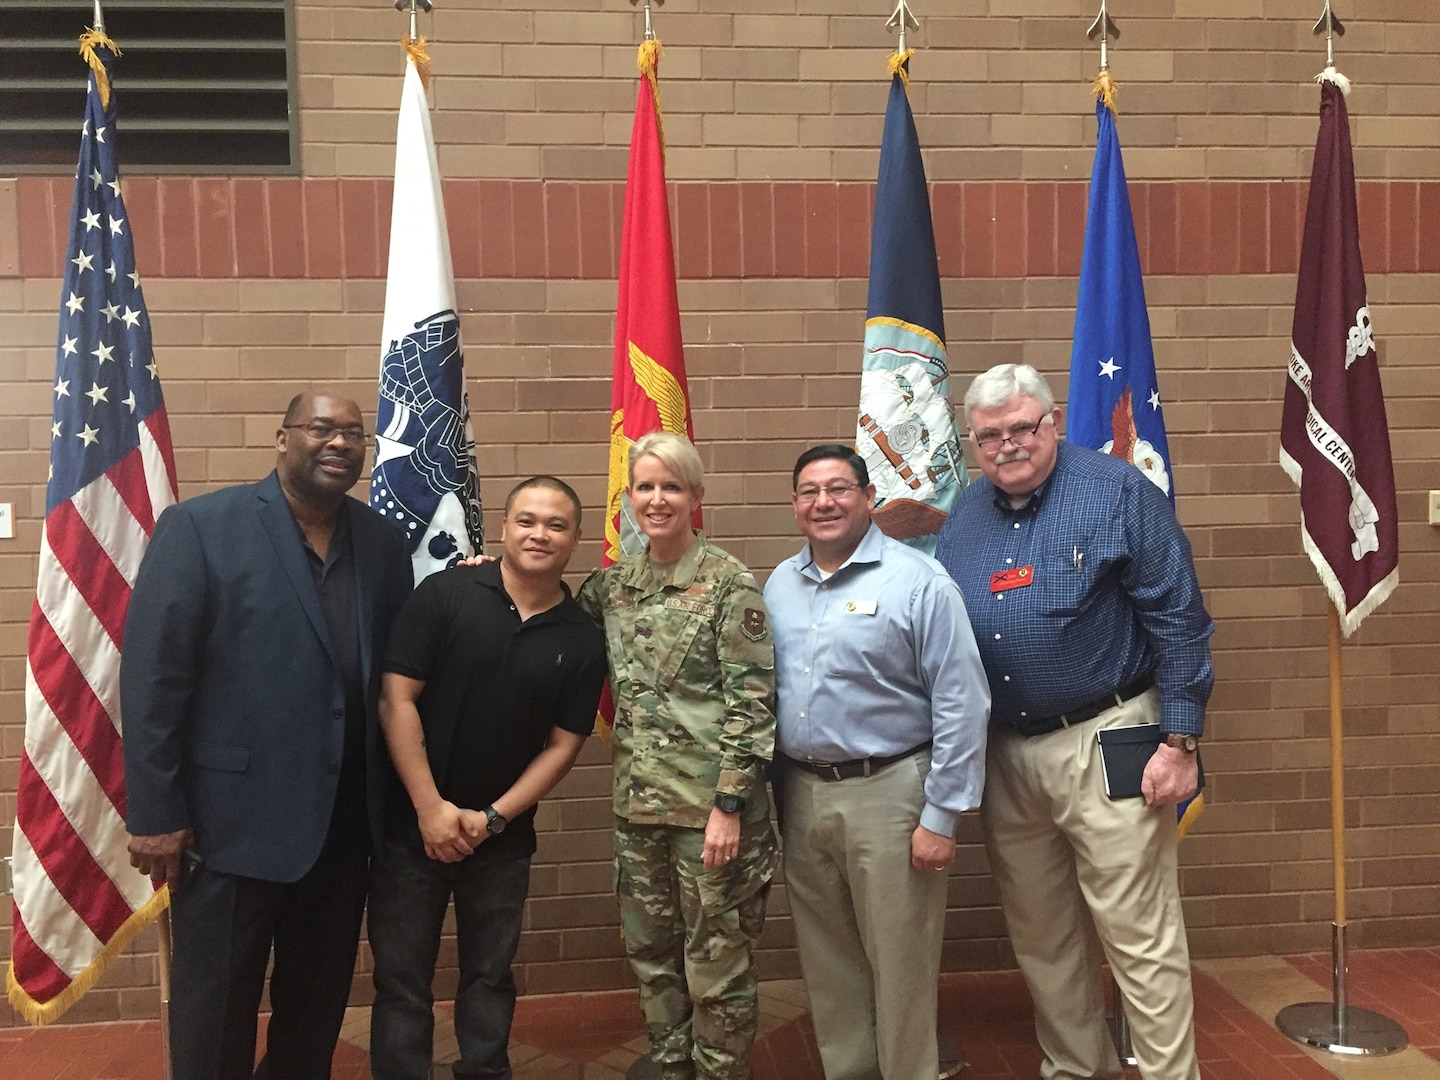 Brig. Gen. Laura L. Lenderman, 502nd Air Base Wing and Joint Base San Antonio commander (center) at the Retiree Appreciation Day at Brooke Army Medical Center on JBSA-Fort Sam Houston Oct. 19. Lenderman gave the opening remarks at the event.